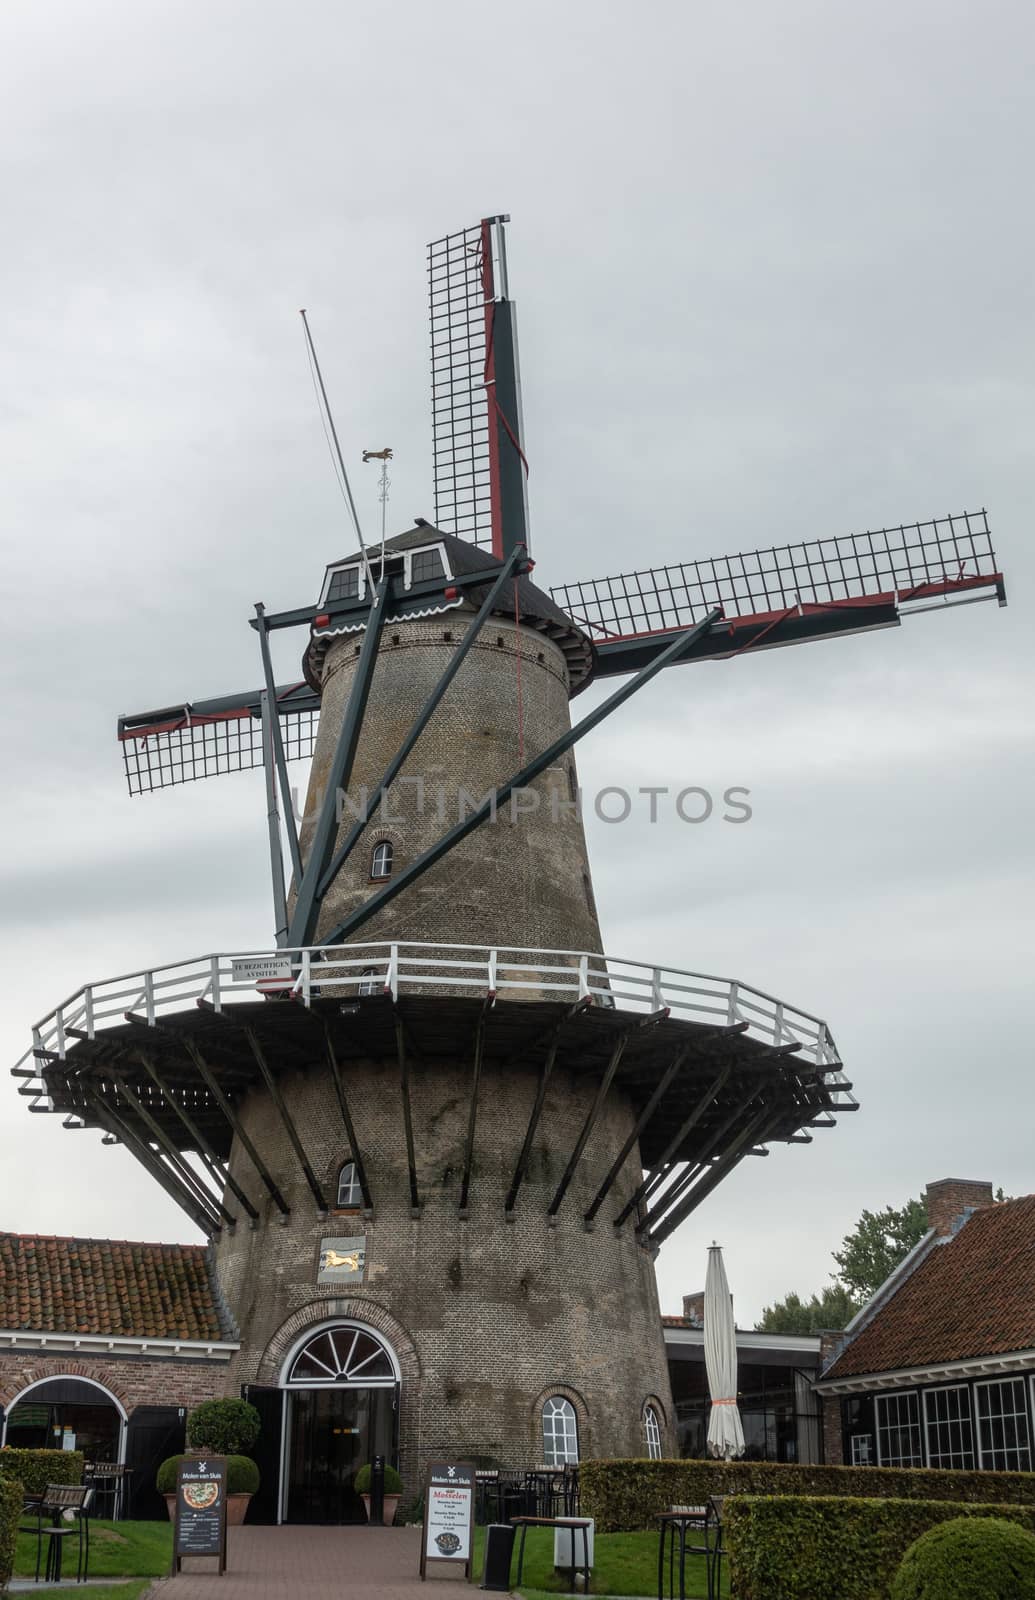 Windmill of Sluis, the Netherlands. by Claudine